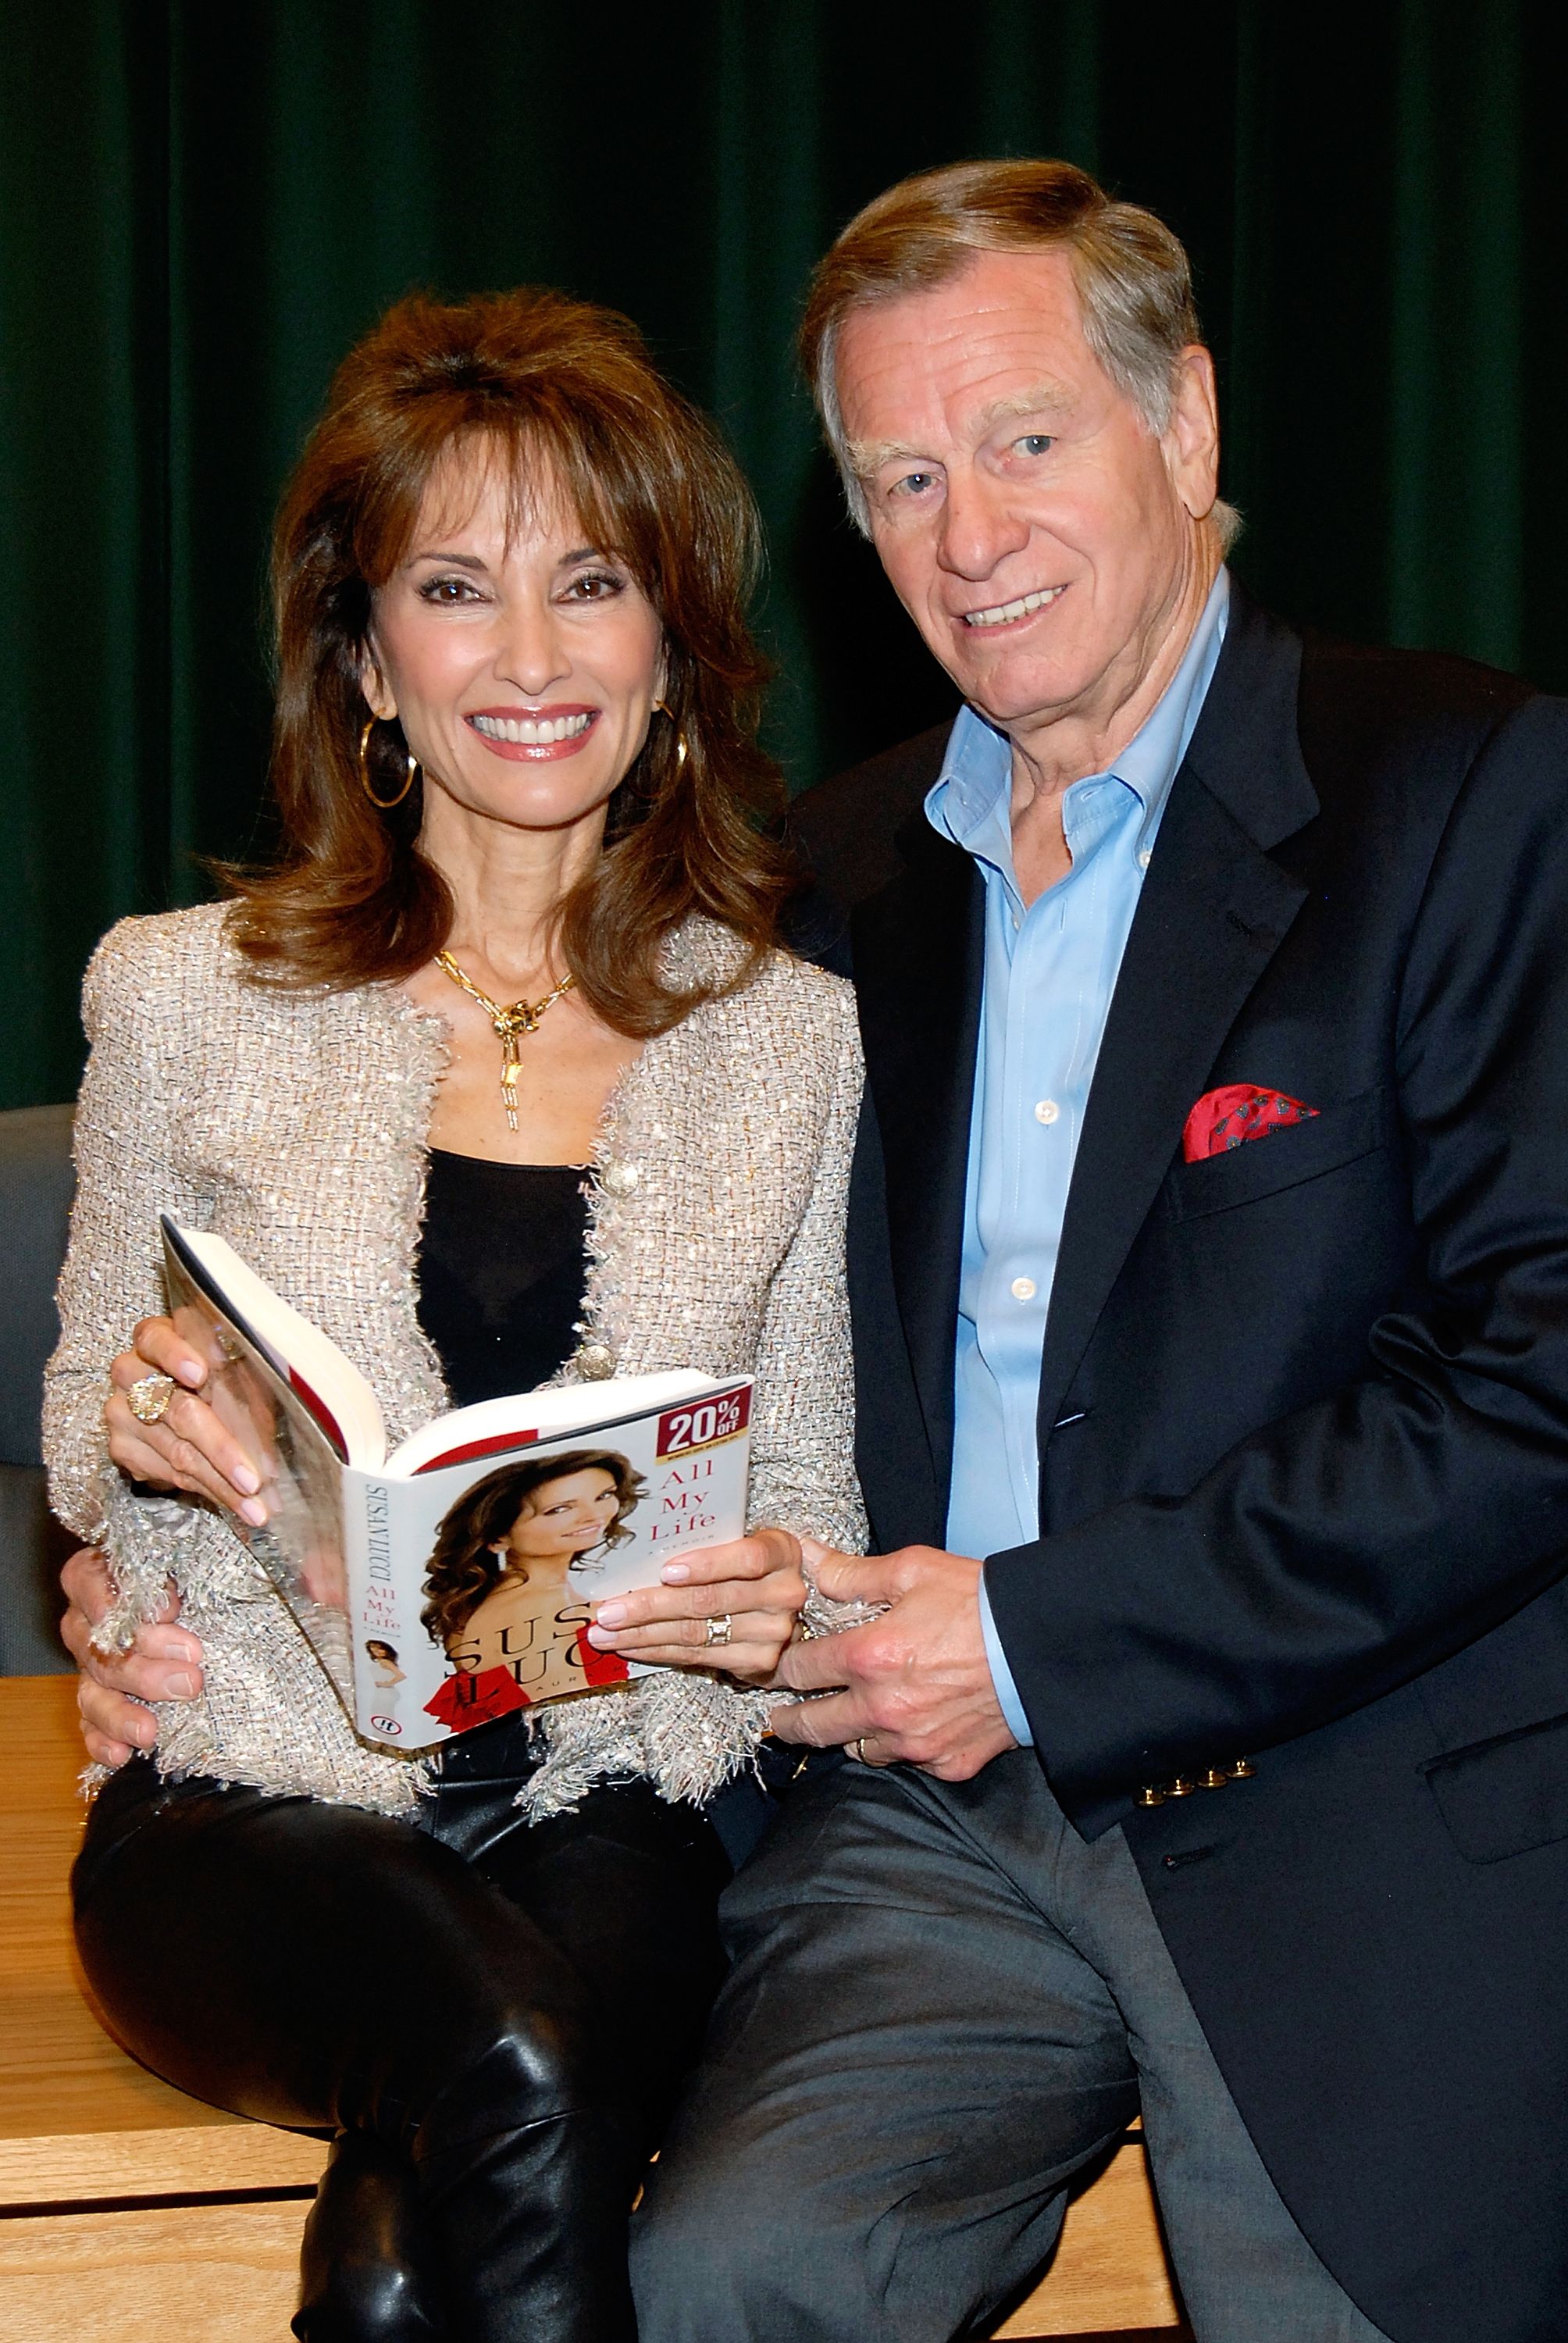 Susan Lucci and her husband Helmut Huber at the signing of her new book "All My Life" at Barnes & Noble Booksellers on April 12, 2011 | Photo: Getty Images